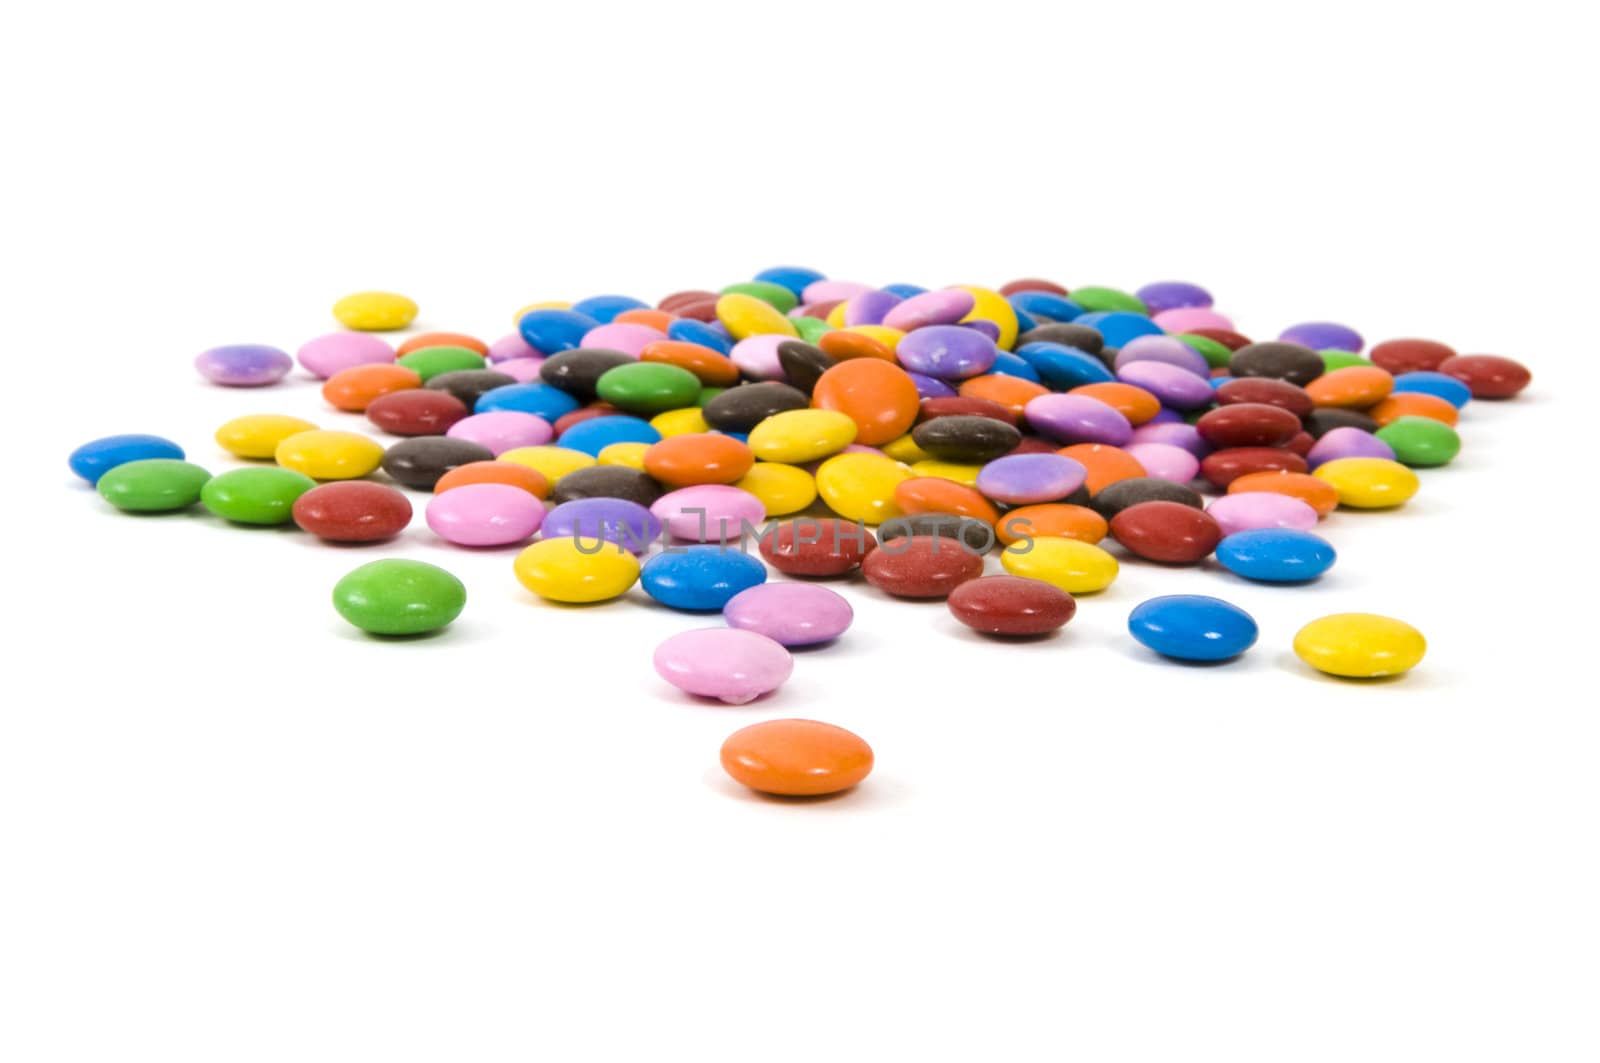 Multi colored chocolate candy on white background